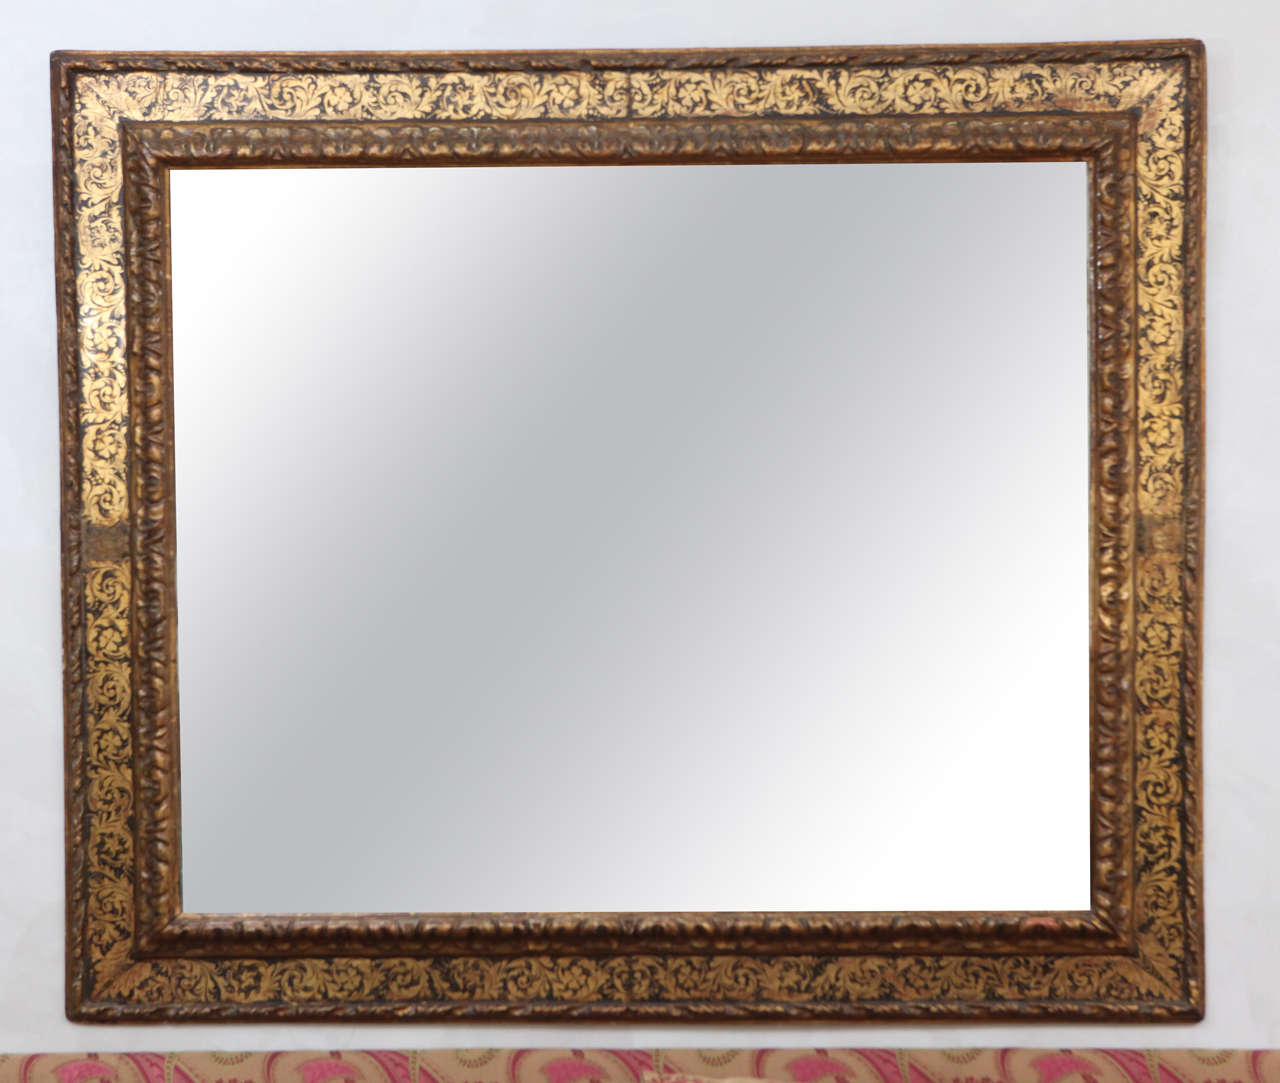 Late 17th century-early 18th century Italian carved giltwood and gilt decorated mirror. This mirror can be hung either horizontally or vertically. The measurements below are for the horizontal position.